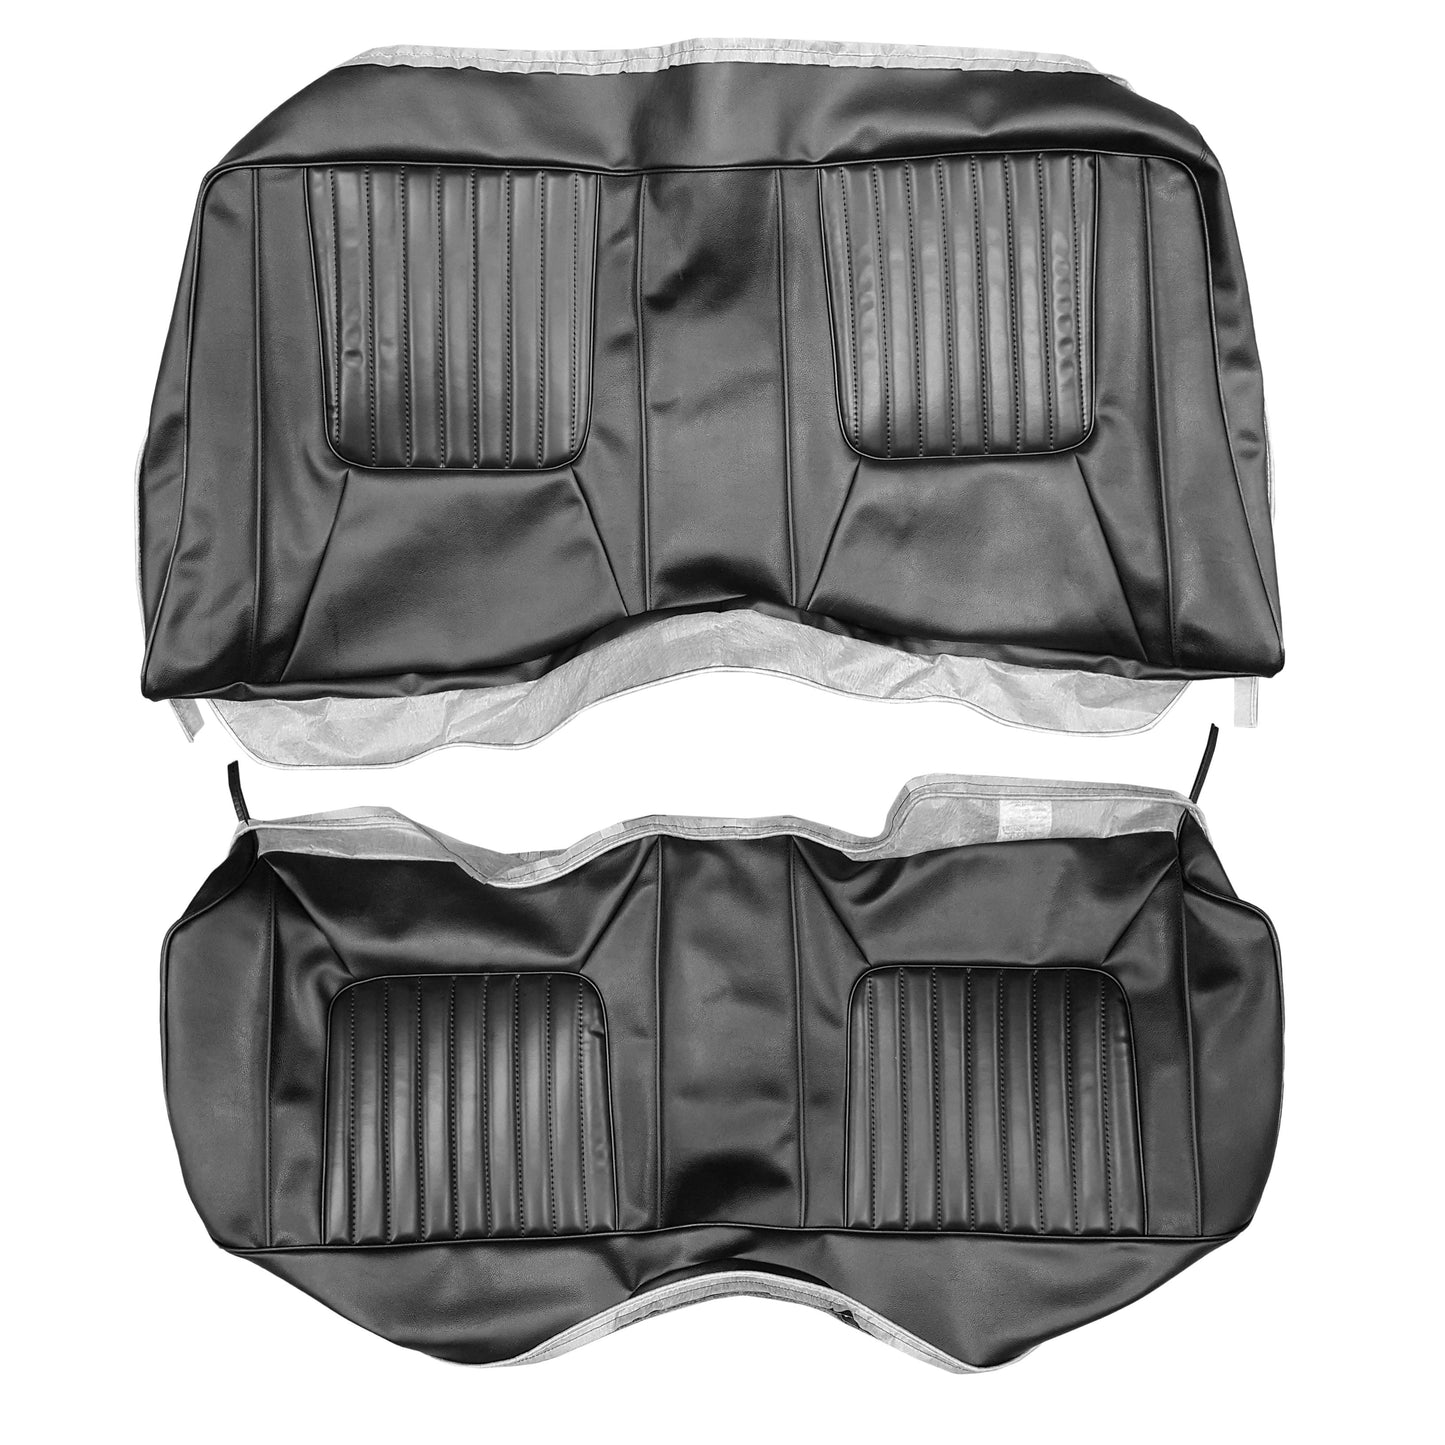 71 CHALLENGER DELUXE REAR SEAT UPHOLSTERY - BLACK